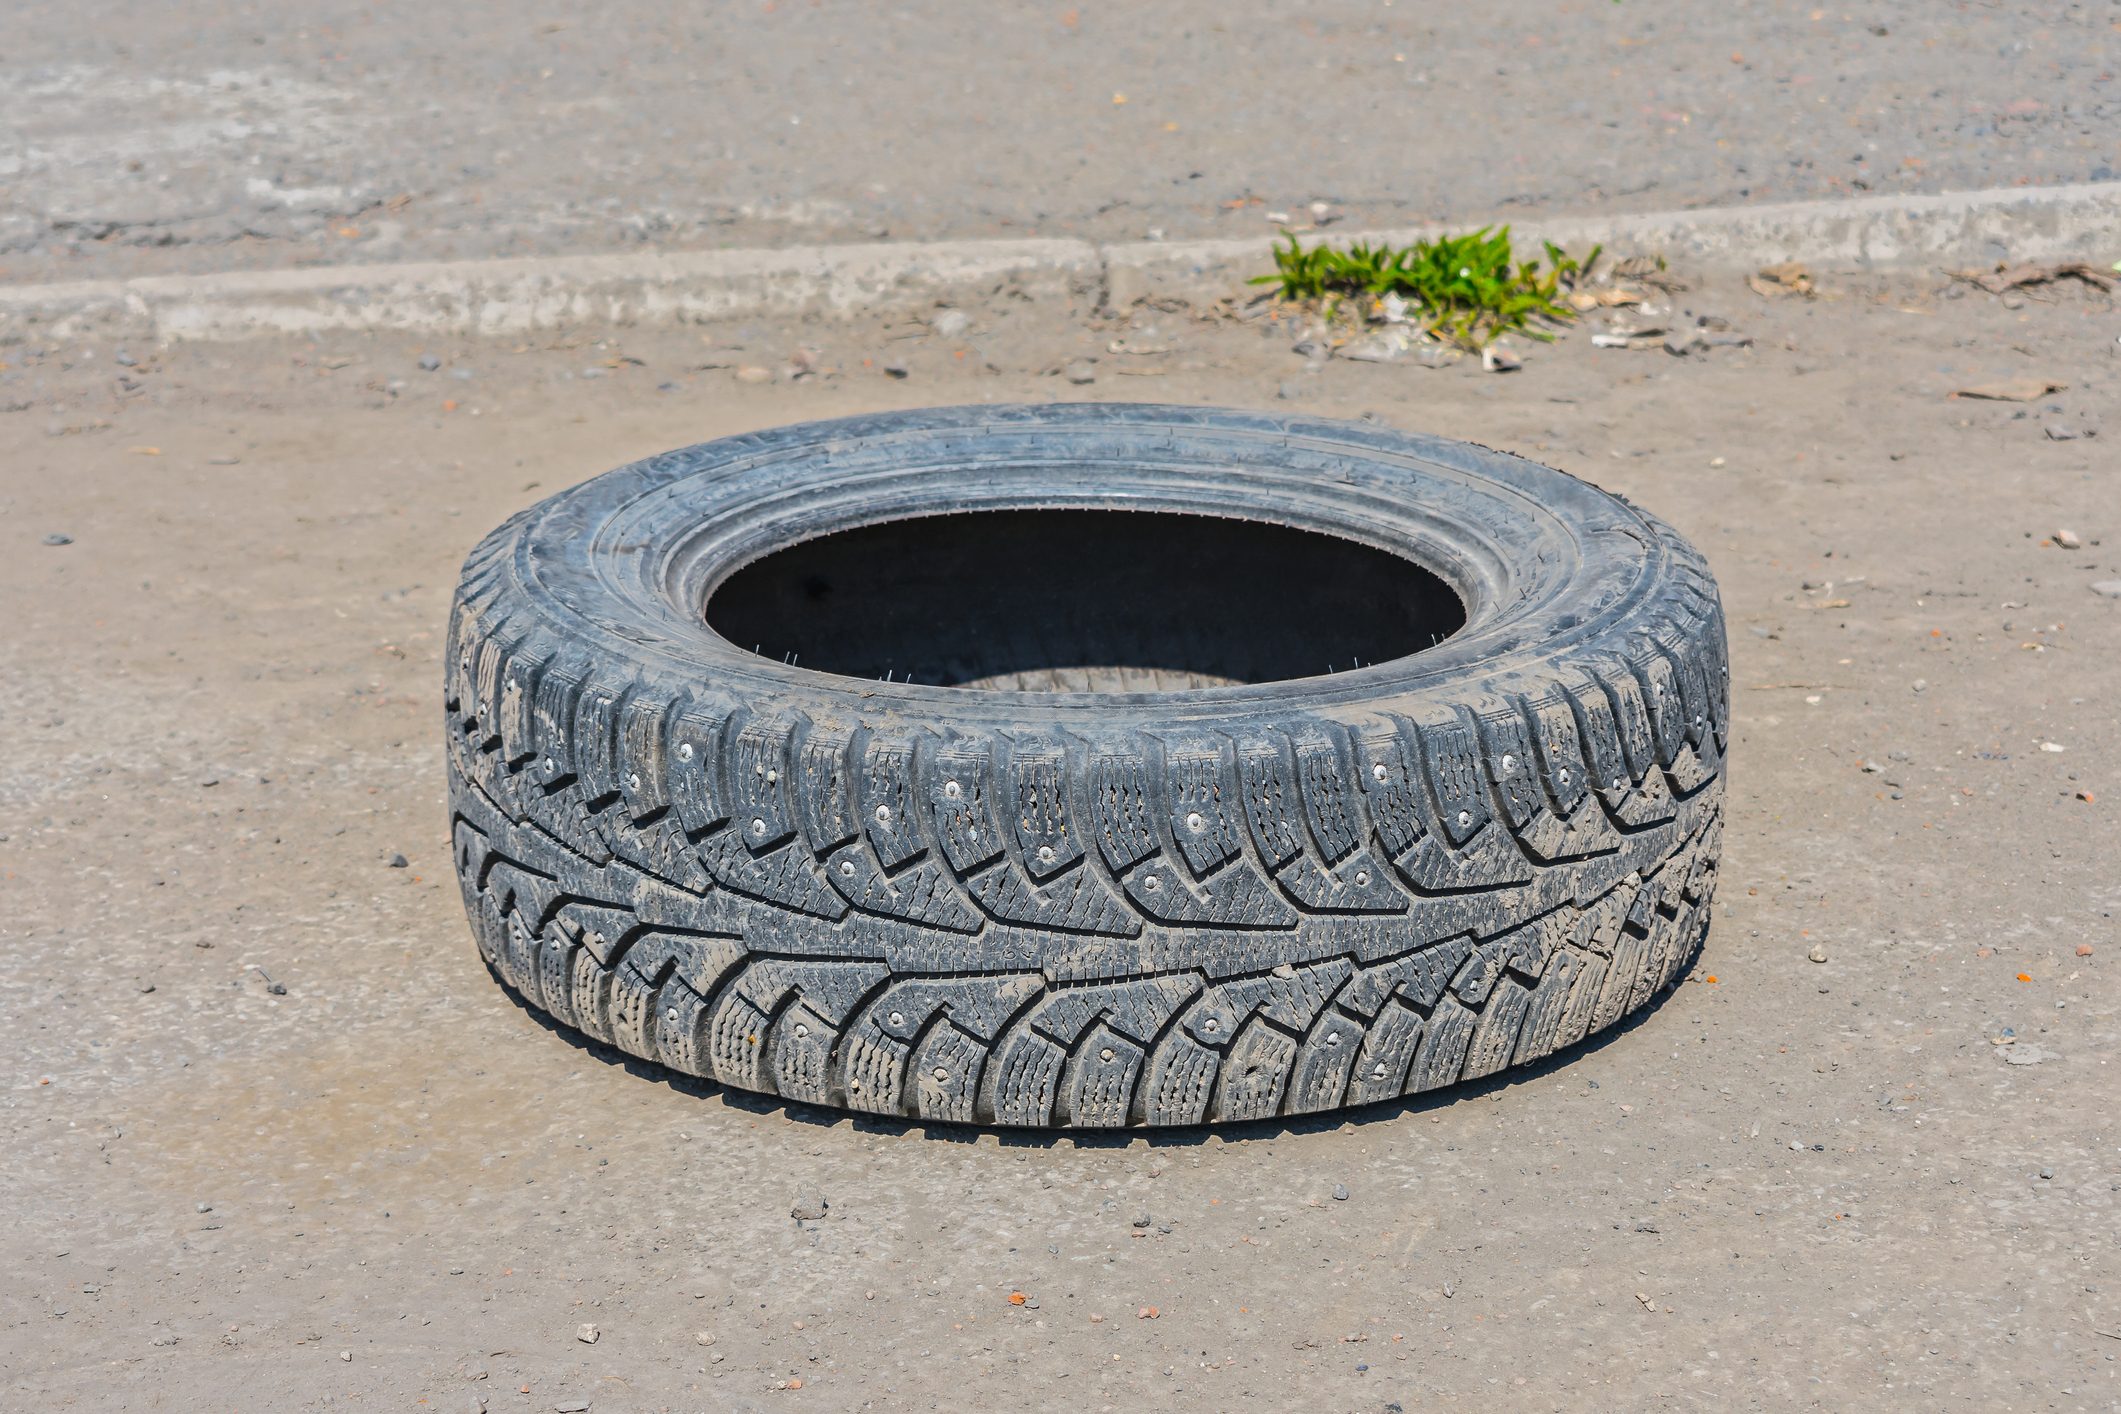 A worn-out winter tire thrown onto the road